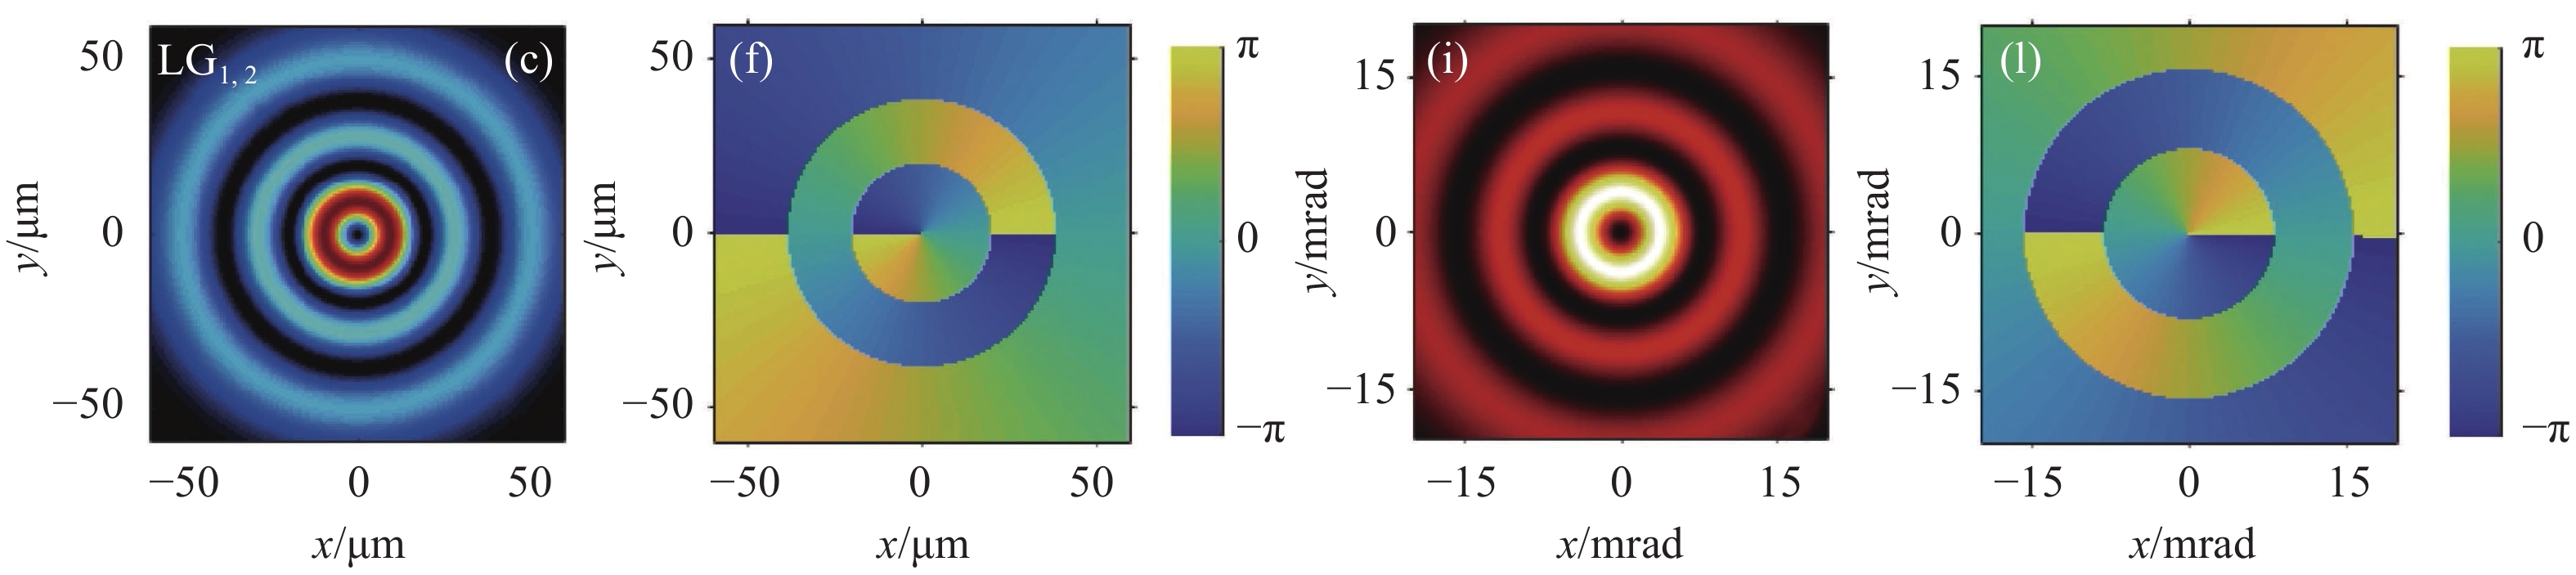 Distributions of laser intensity and phase in the near and far fields for three LG beams with different modes. (a) - (c) Near-field (z = 0 mm) intensity, the unit is I0 = 1014 W/cm2; (d) - (f) Phase; (g) - (i) Far-field (z = ∞) intensity; (j) - (l) Phase, the intensity has been normalized, the phase is defined within [−π, π]